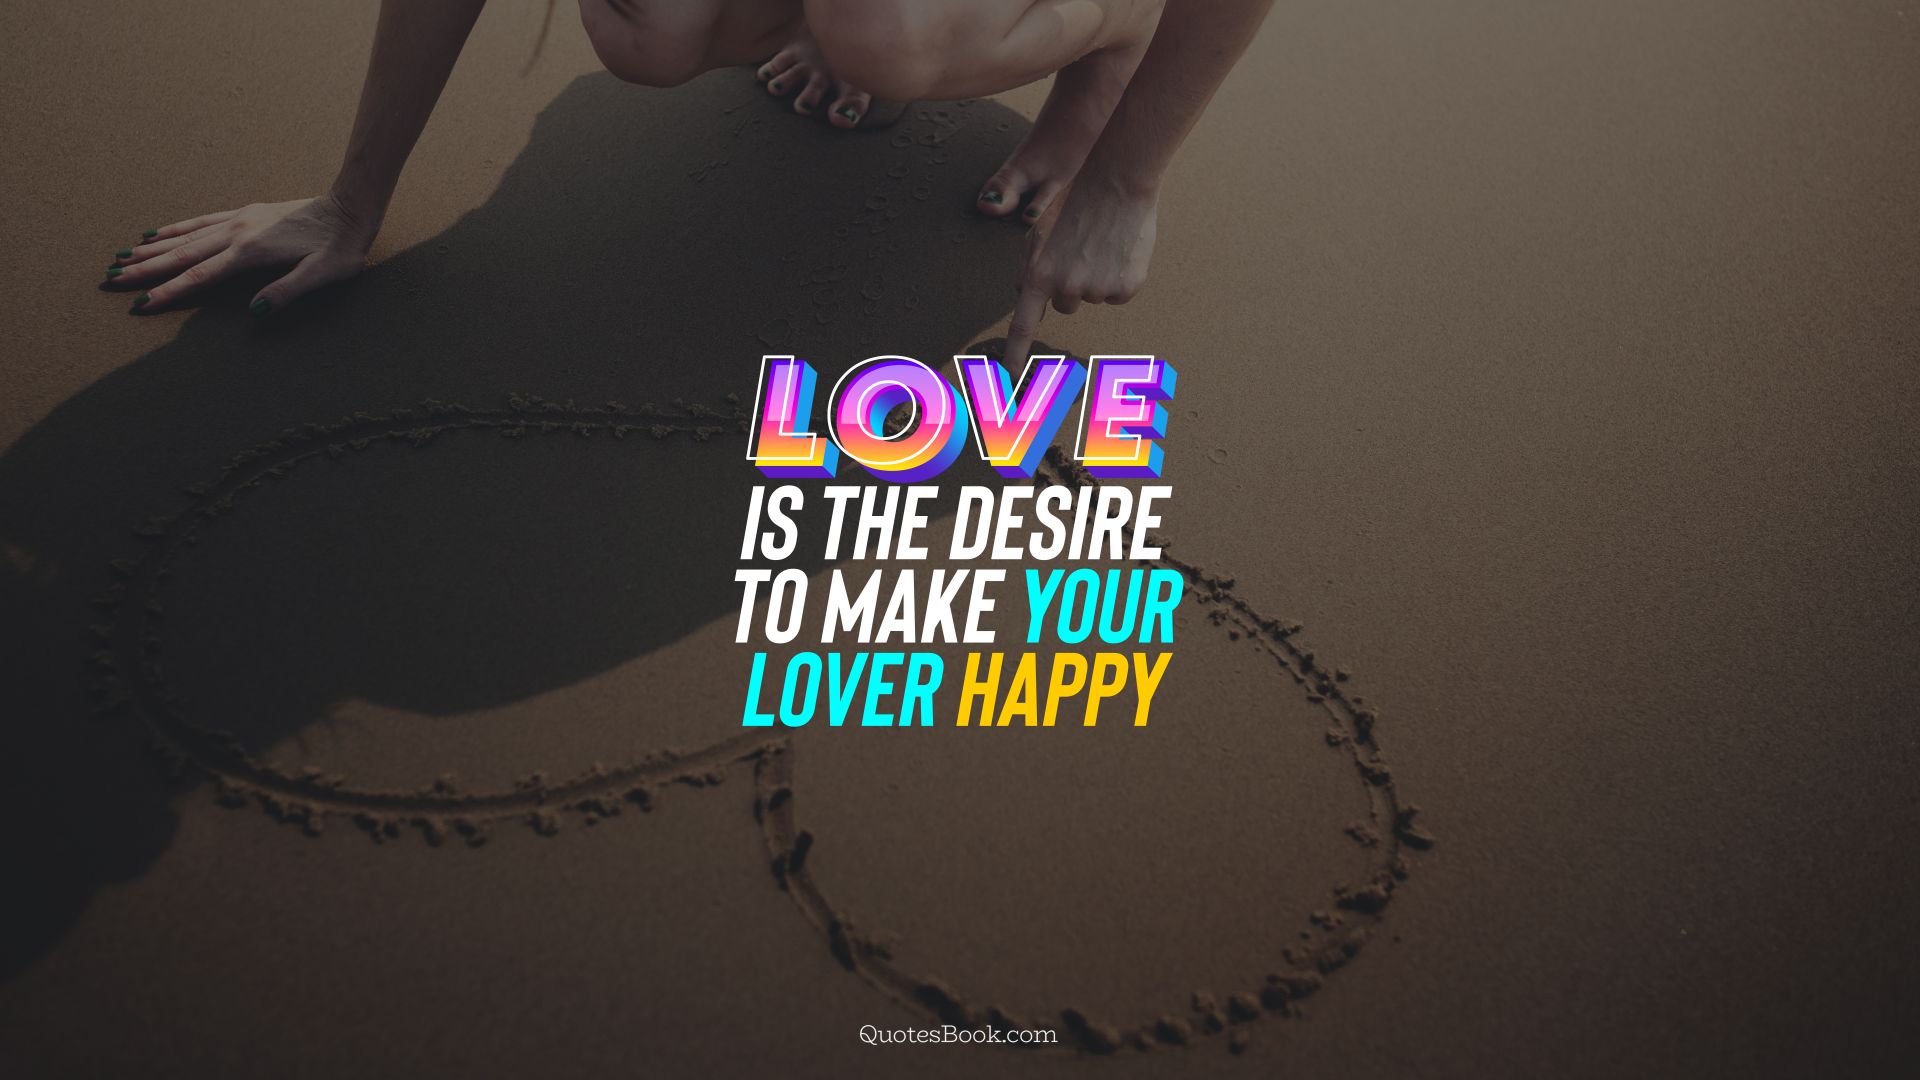 Love is the desire to make your lover happy. - Quote by QuotesBook